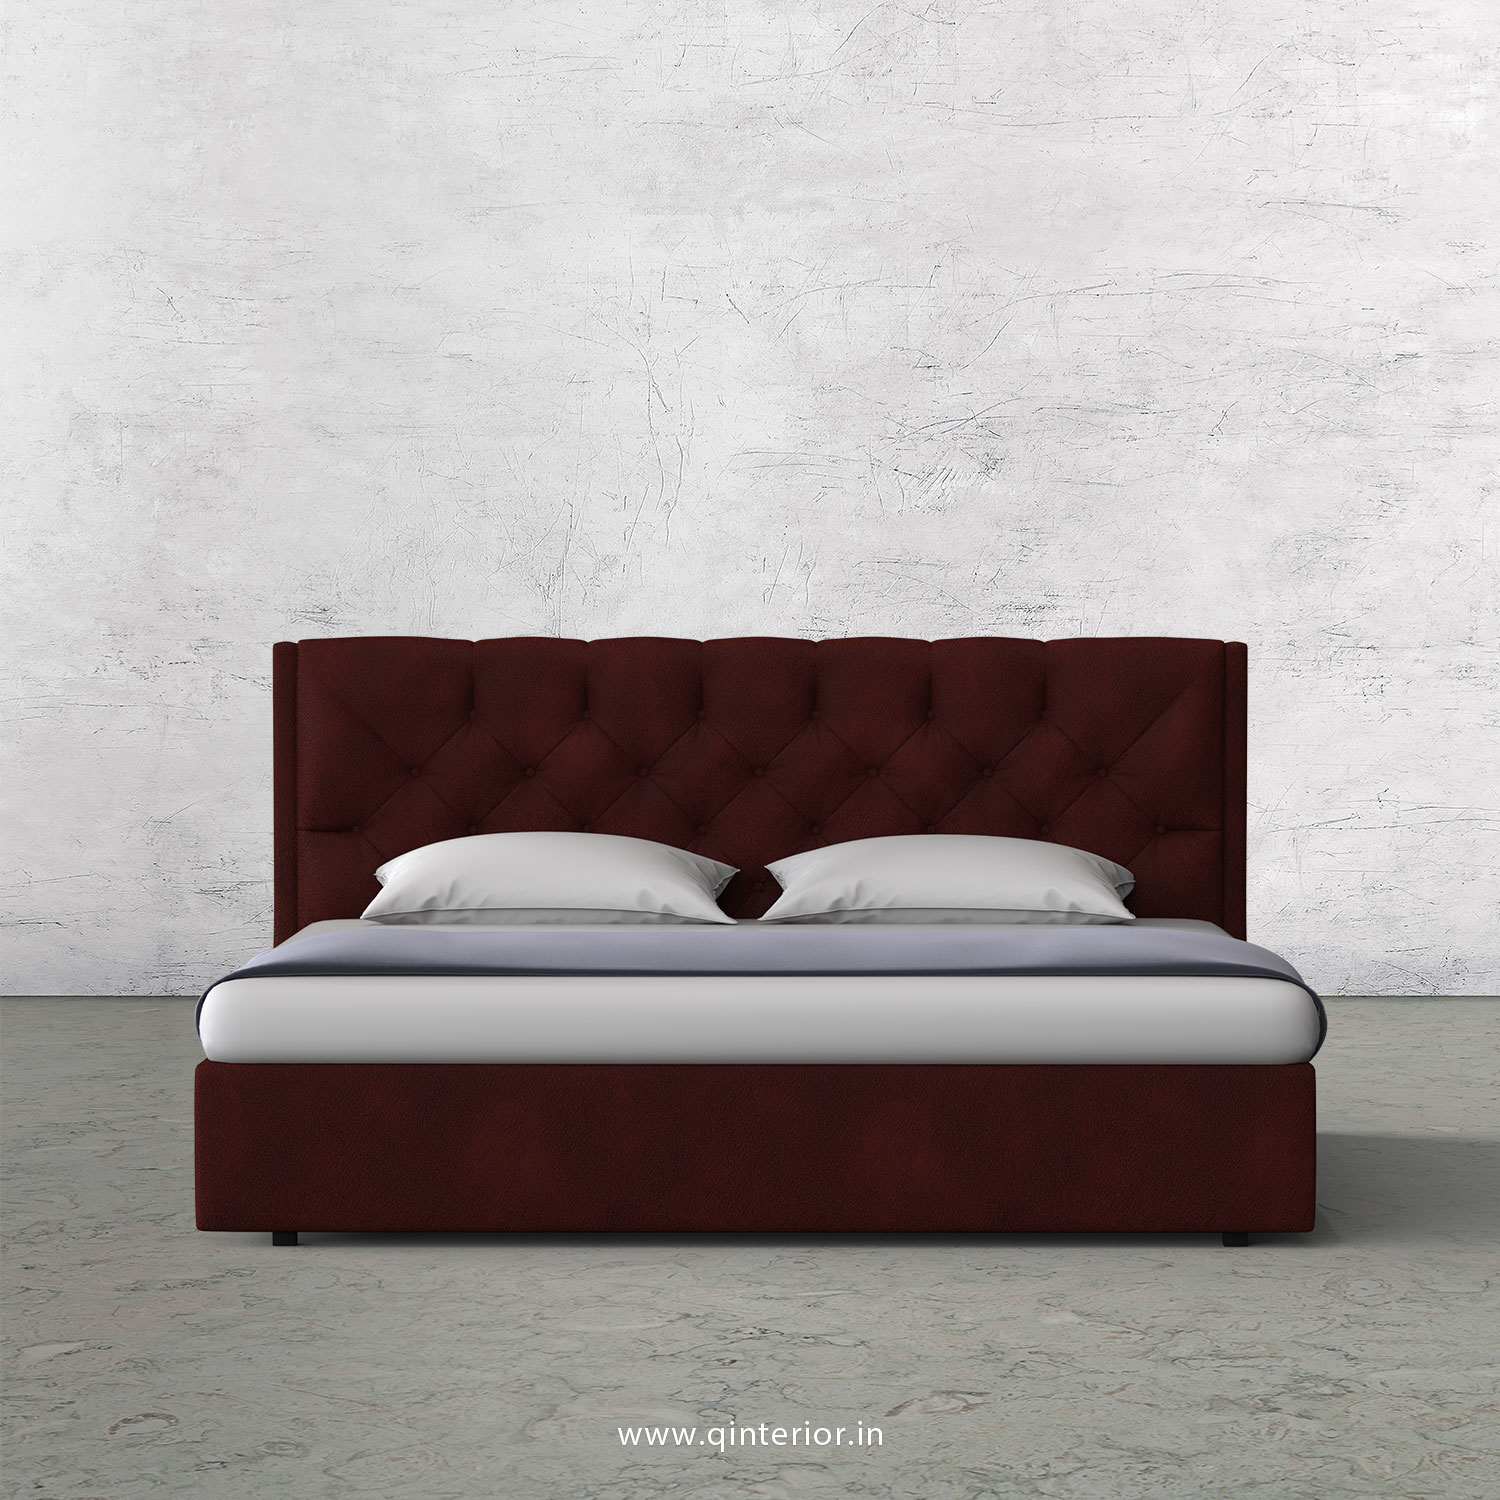 Scorpius Queen Bed in Fab Leather Fabric - QBD009 FL08